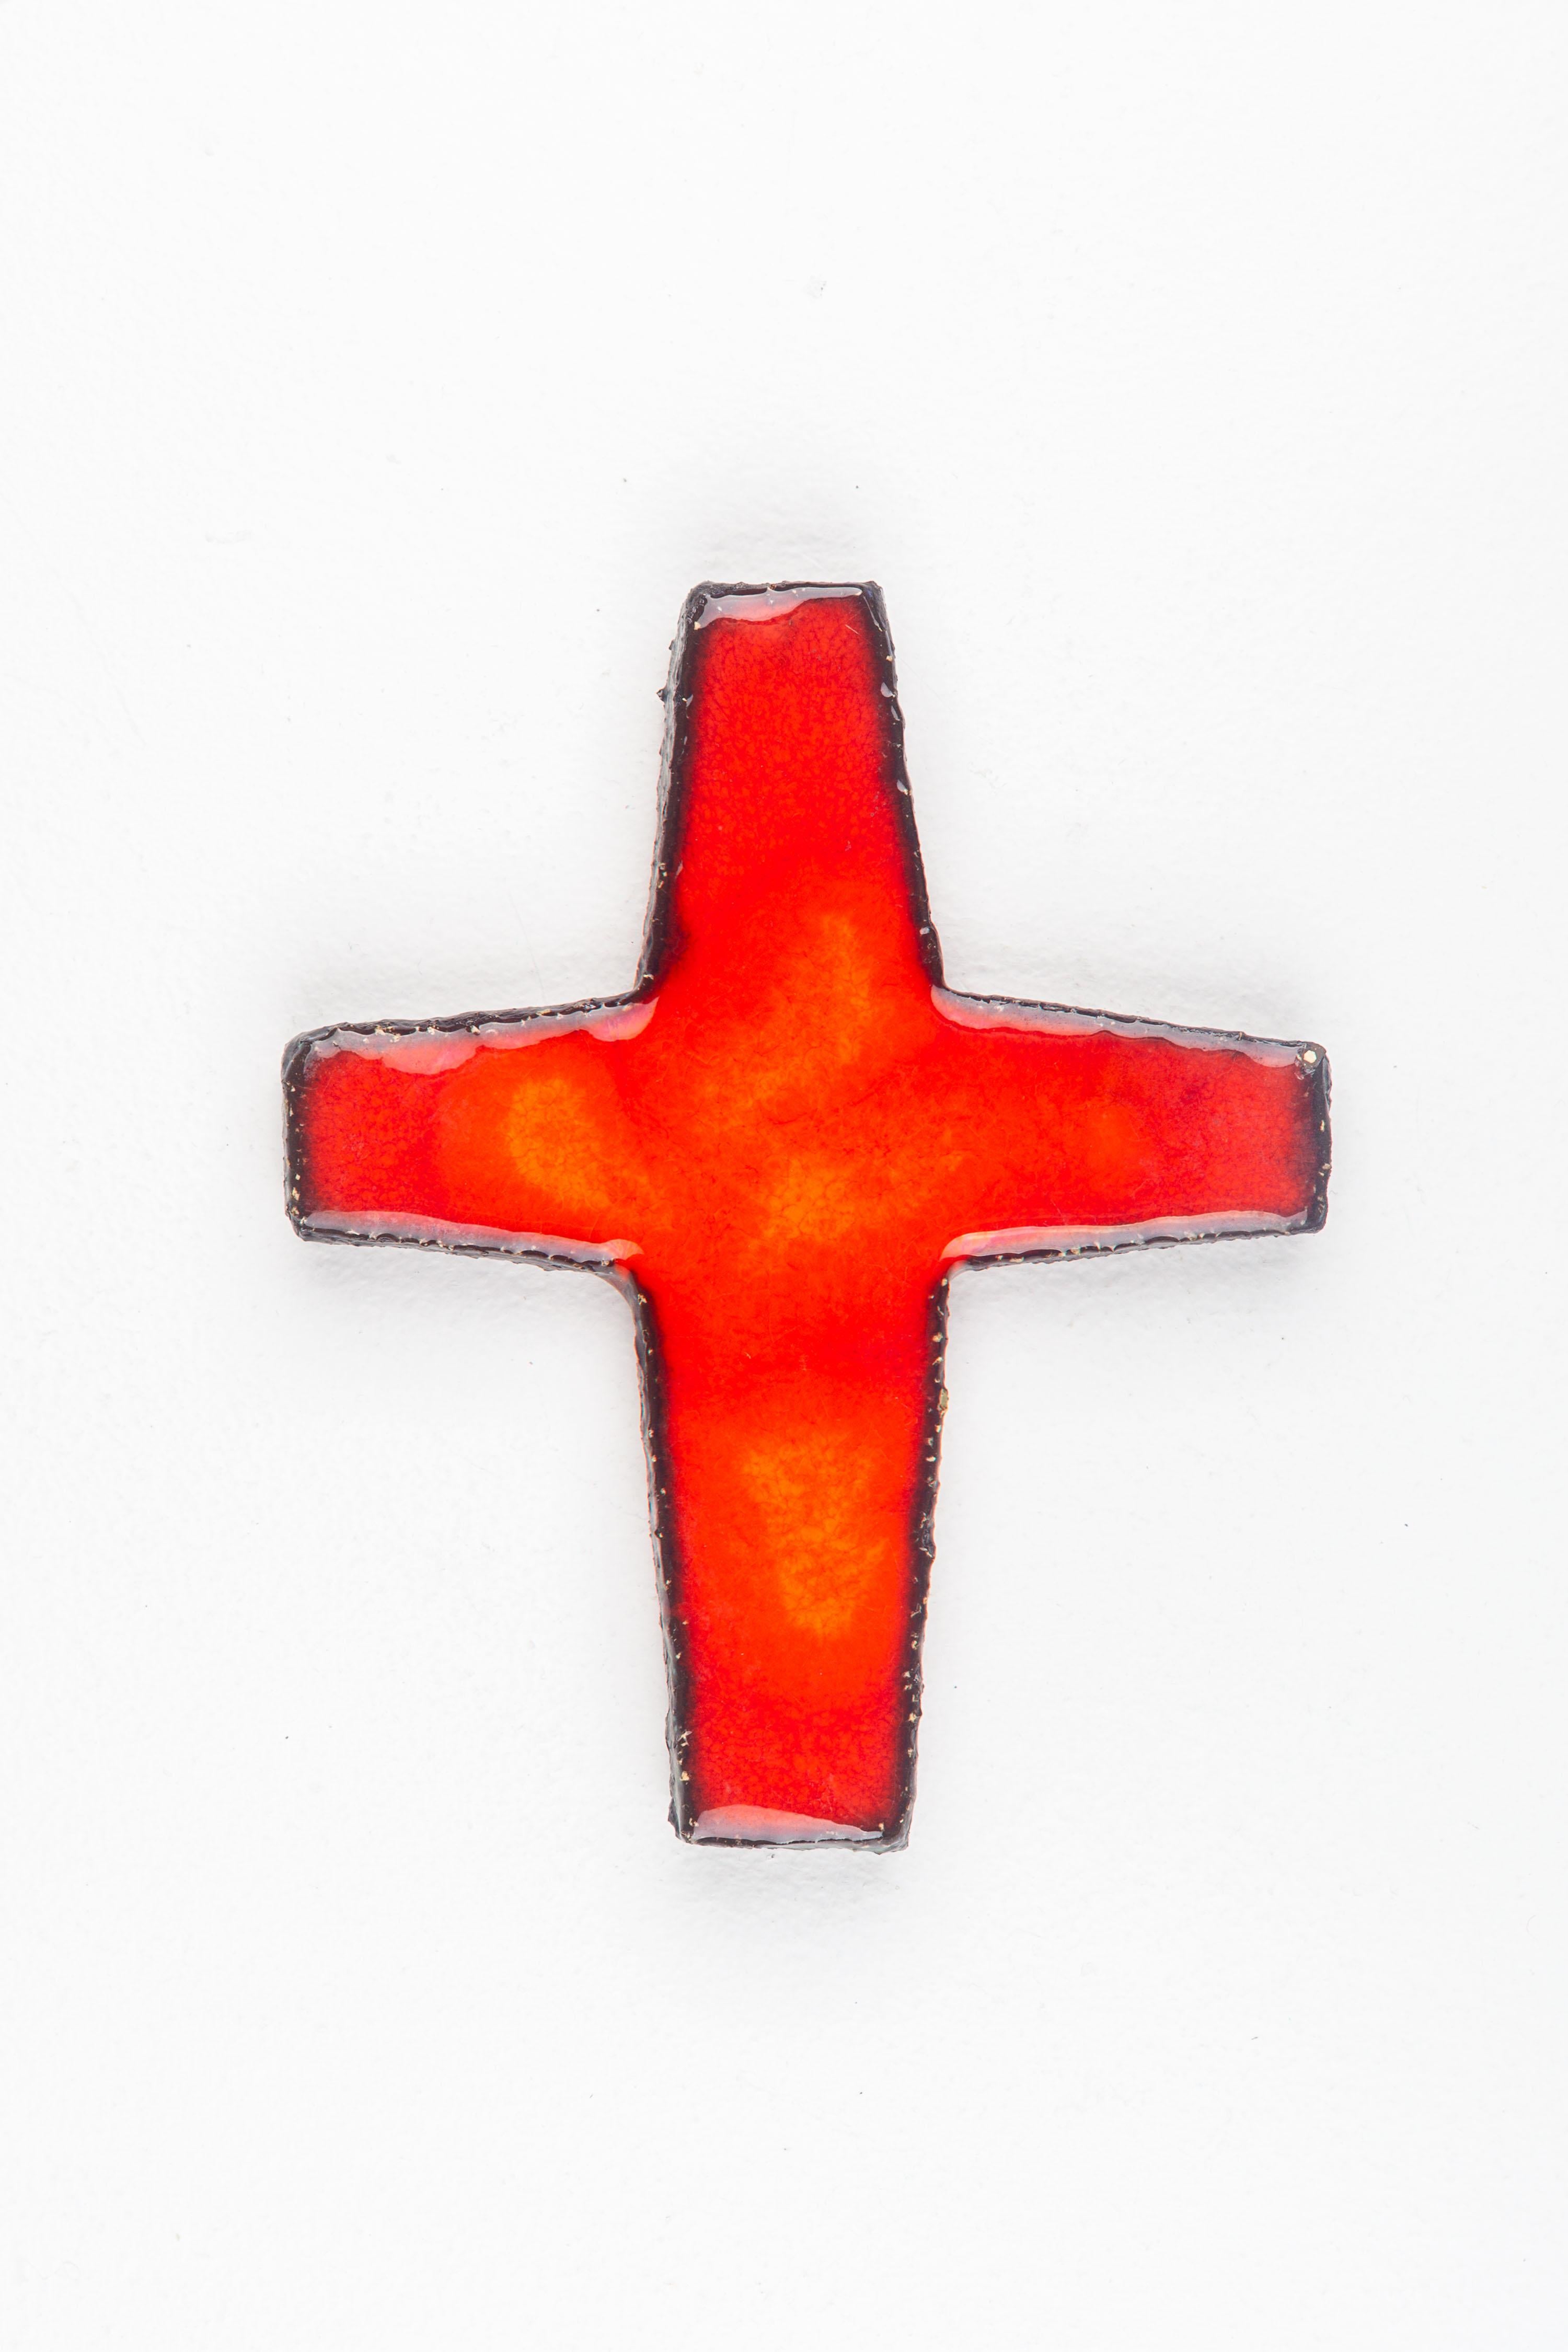 This mid-century modern wall cross represents the confluence of spiritual symbolism and the era's artistic innovation. Handcrafted by a European studio pottery artist, the piece features a vibrant, fiery red glaze, a bold choice that captures the